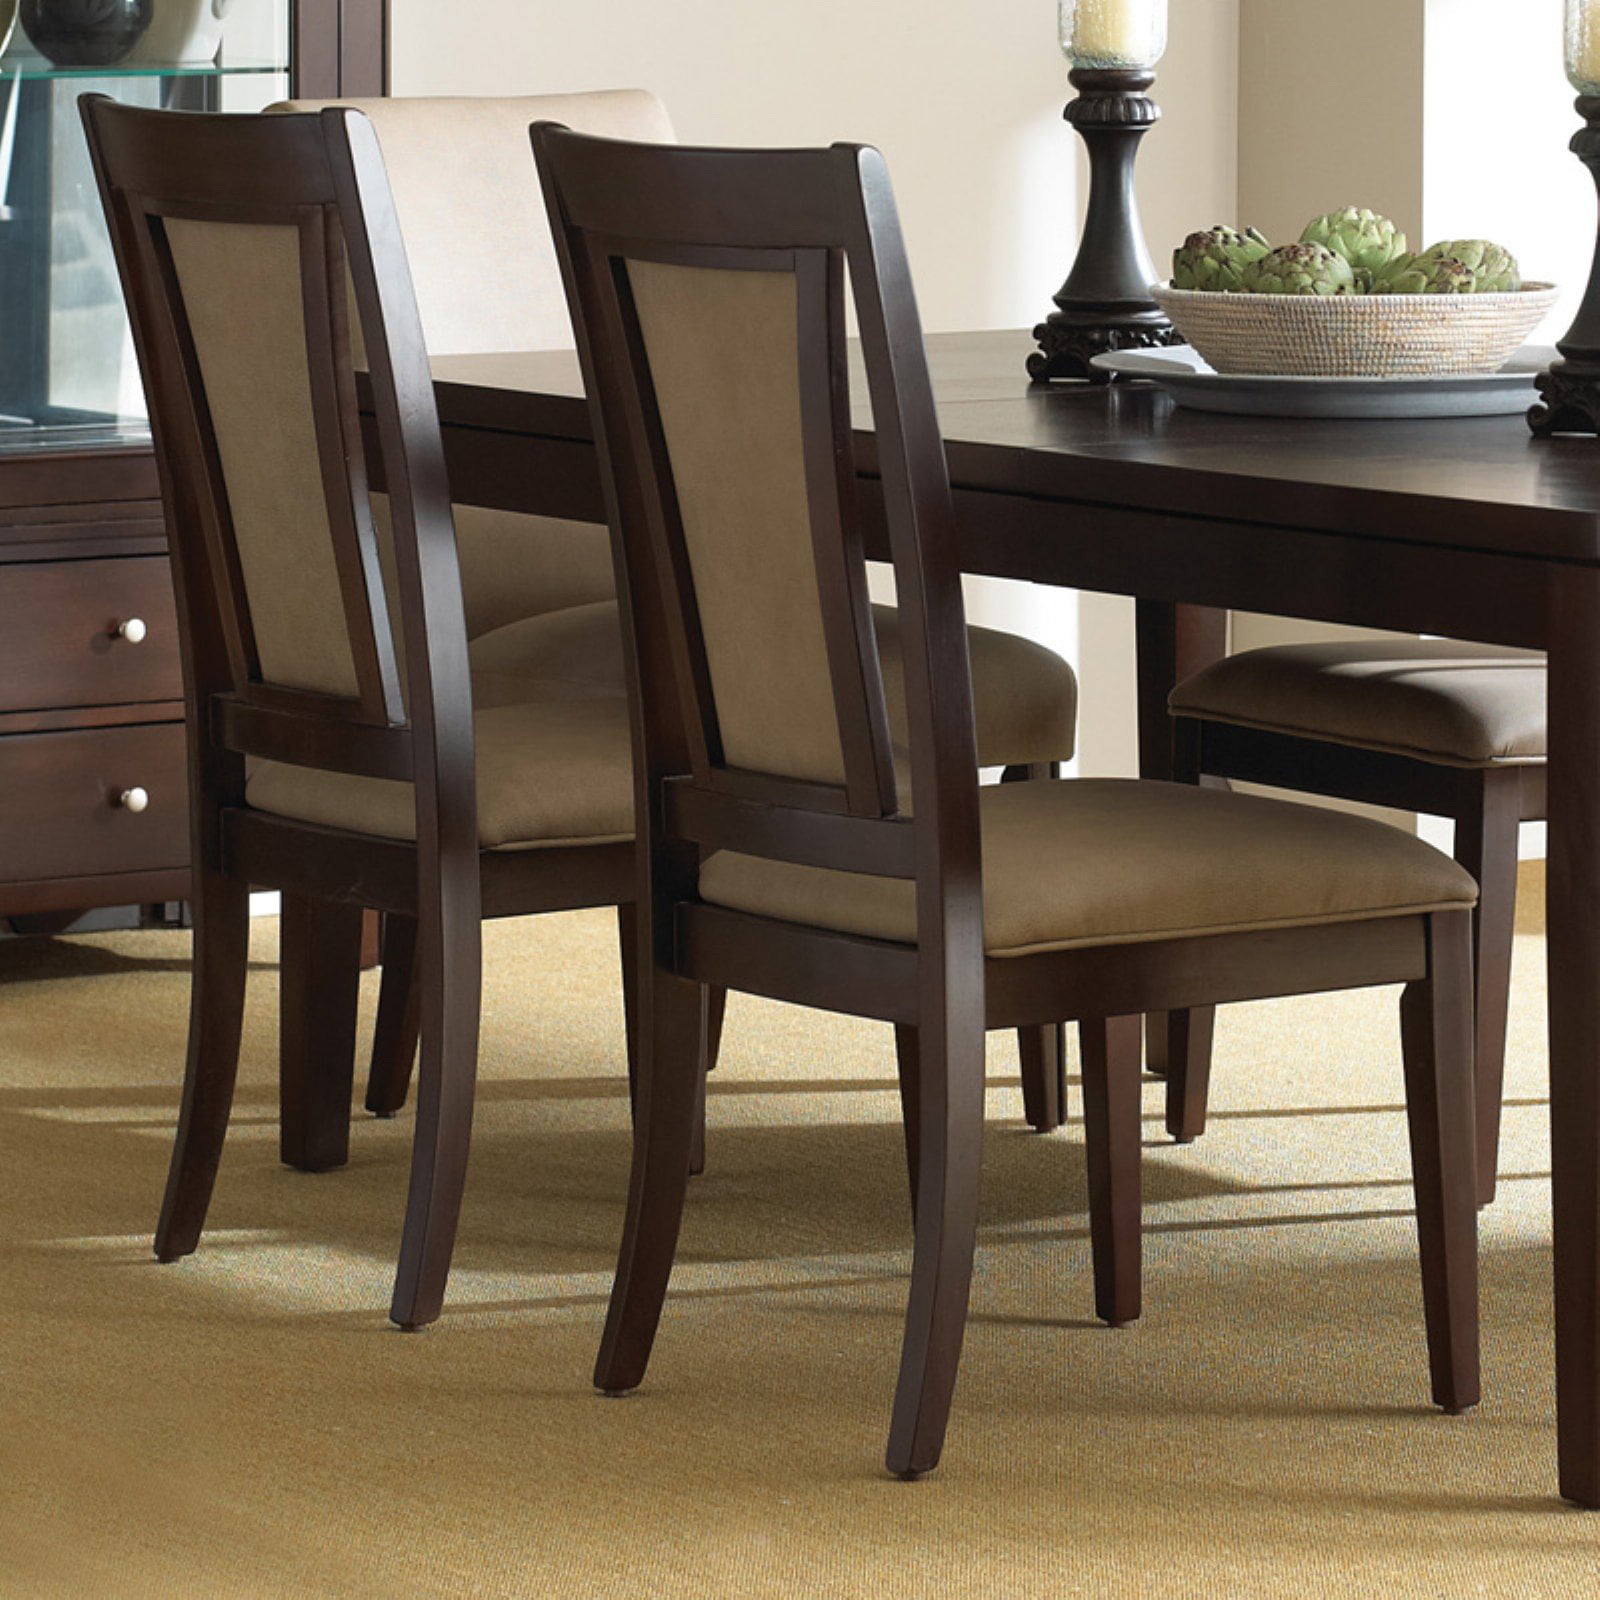 Steve Silver Wilson Side Dining Chairs, Merlot Dining Room Chairs